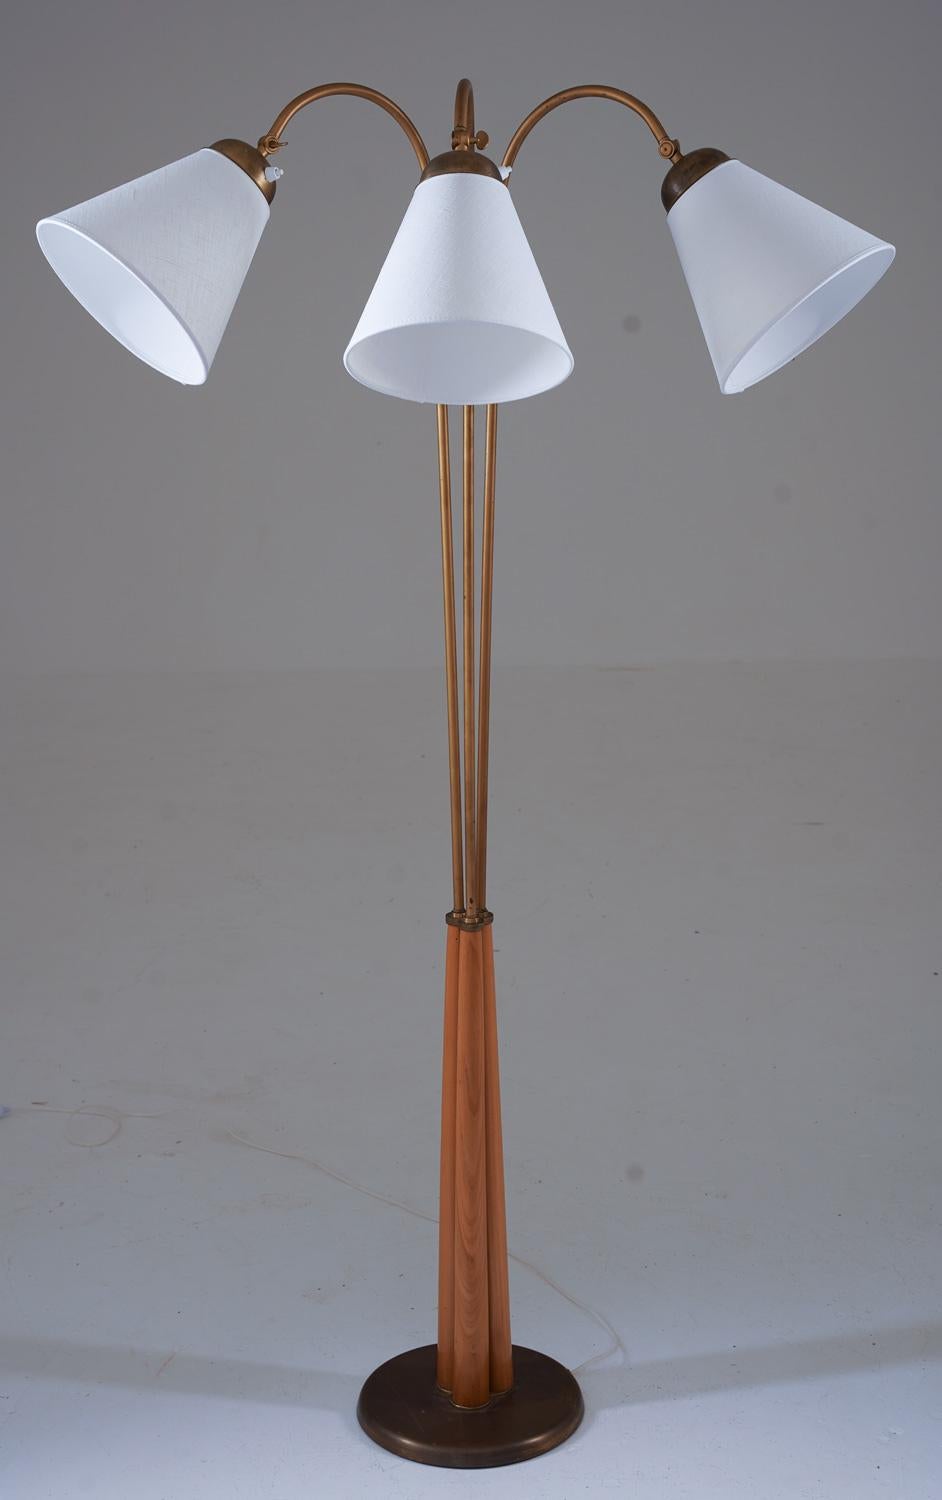 This is a lovely Swedish Modern floor lamp that was manufactured in Sweden during the 1940s. The lamp features three swivel arms, supported by wooden rods that are fixtures in the brass base.

Condition:
The lamp is in very good vintage condition,